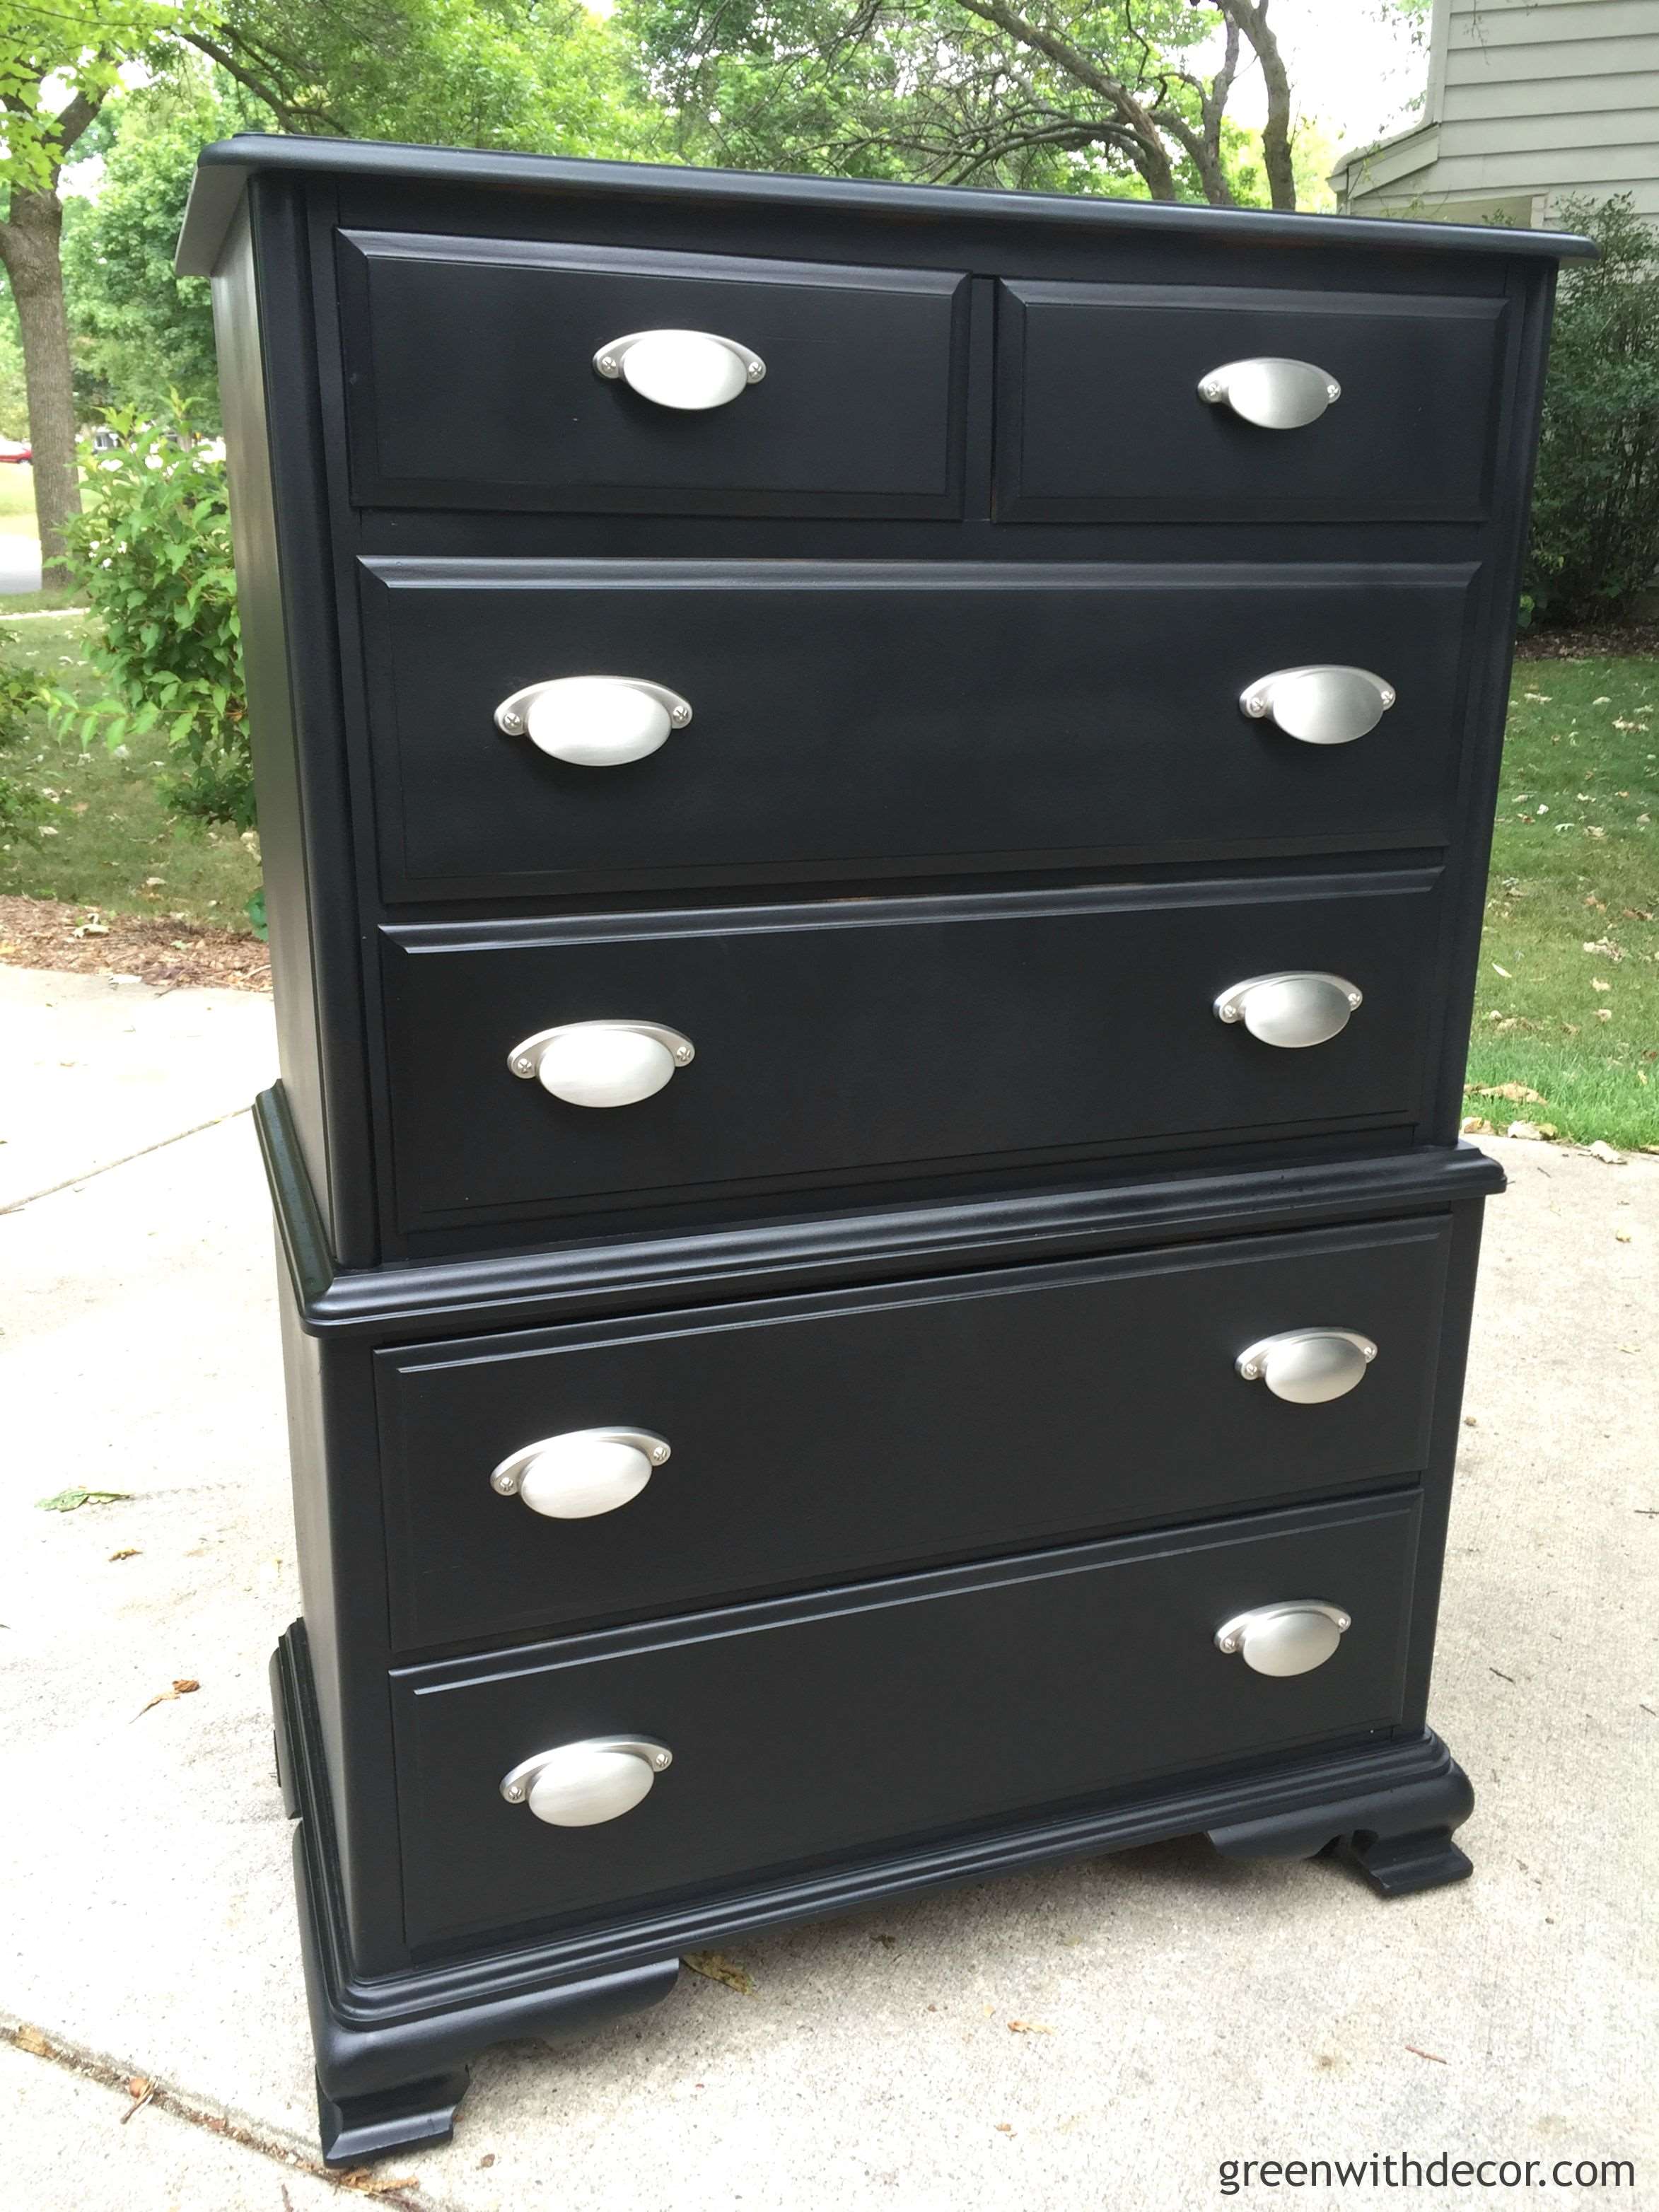 Black Painted Furniture-Make this Simple Update to Furniture